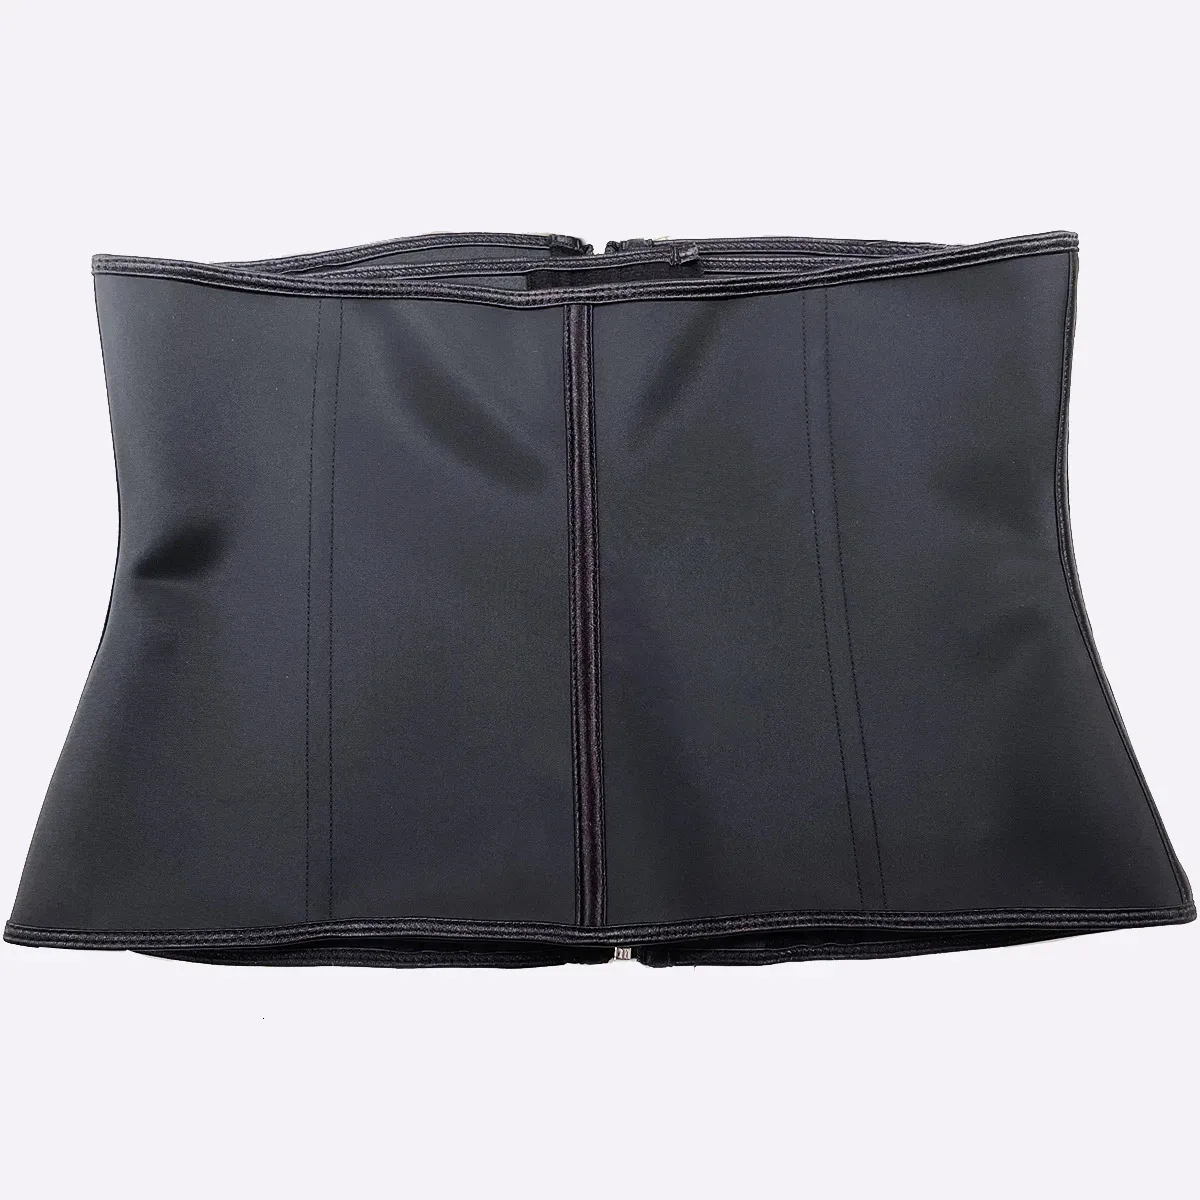 Colombian Latex Waist Shaper Wrap With Double Compression And Tummy Control  For Slimming And Flawless Belly 13 Steel Bones Belt Included Model 231120  From Bao04, $14.6